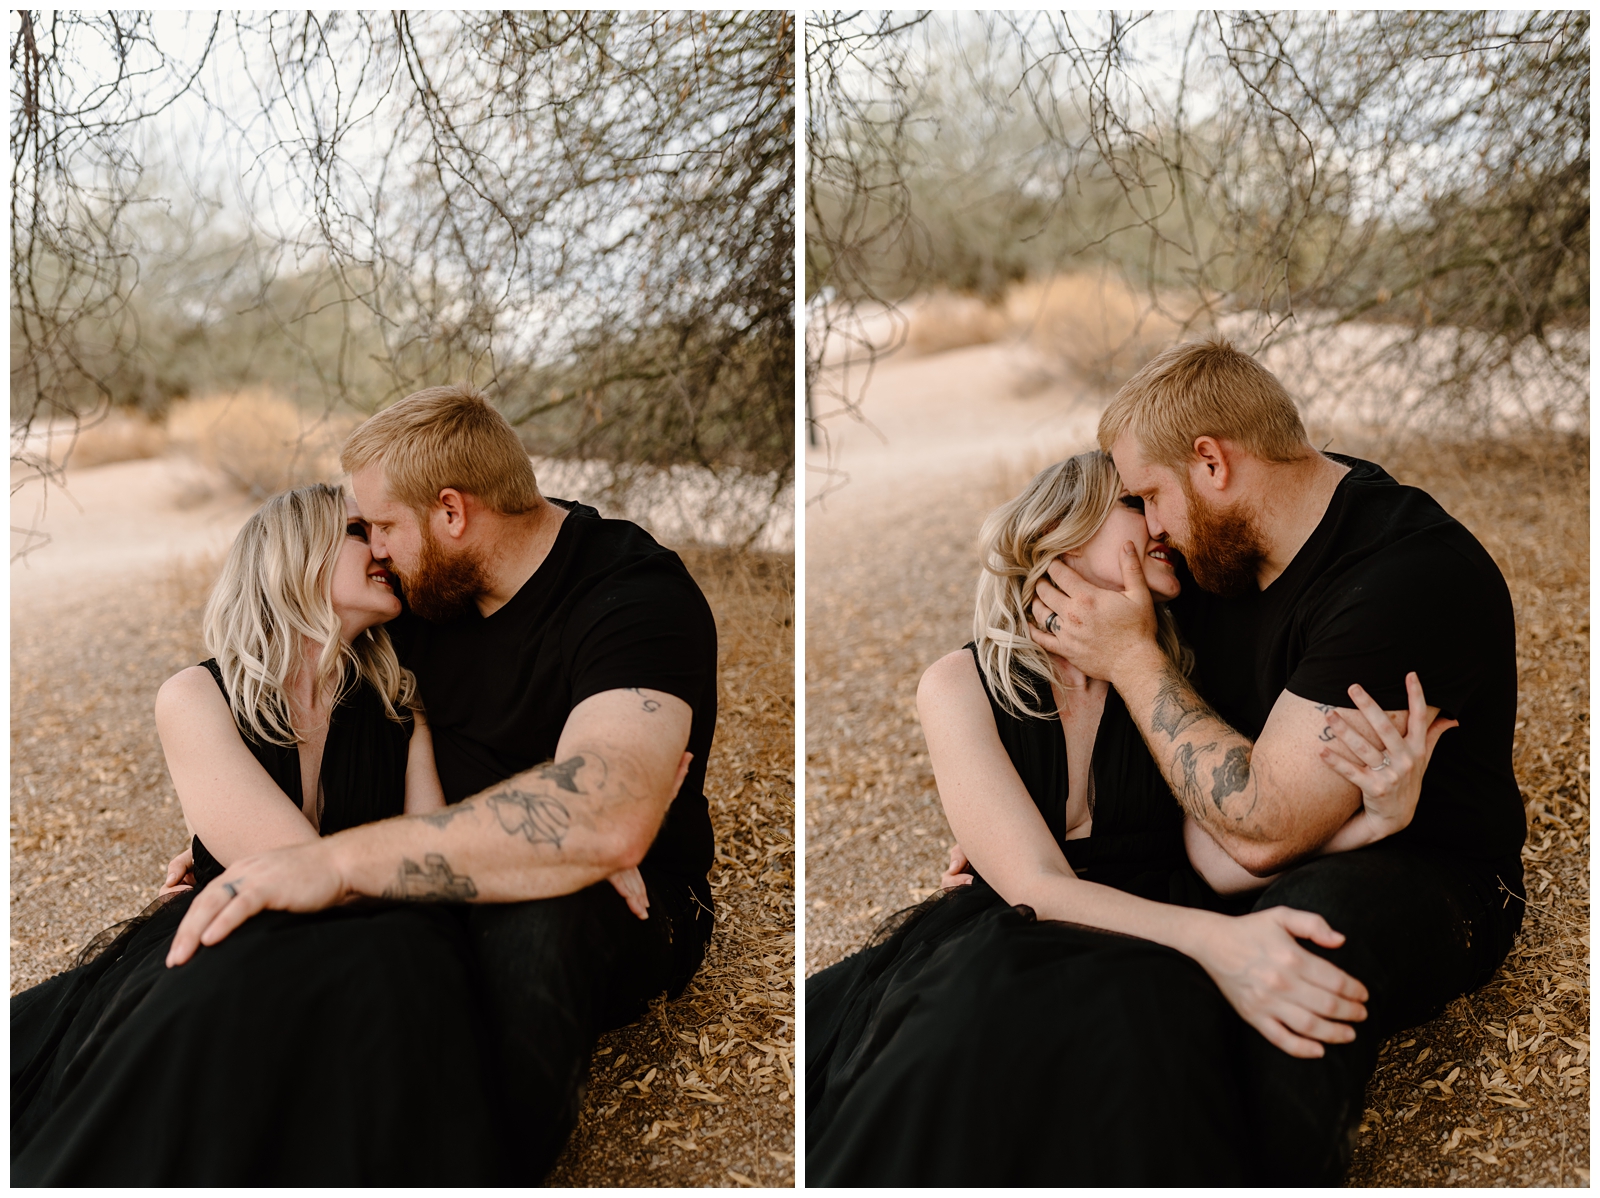 Intimate newlywed portraits on their Halloween elopement day by Phoenix destination photographer